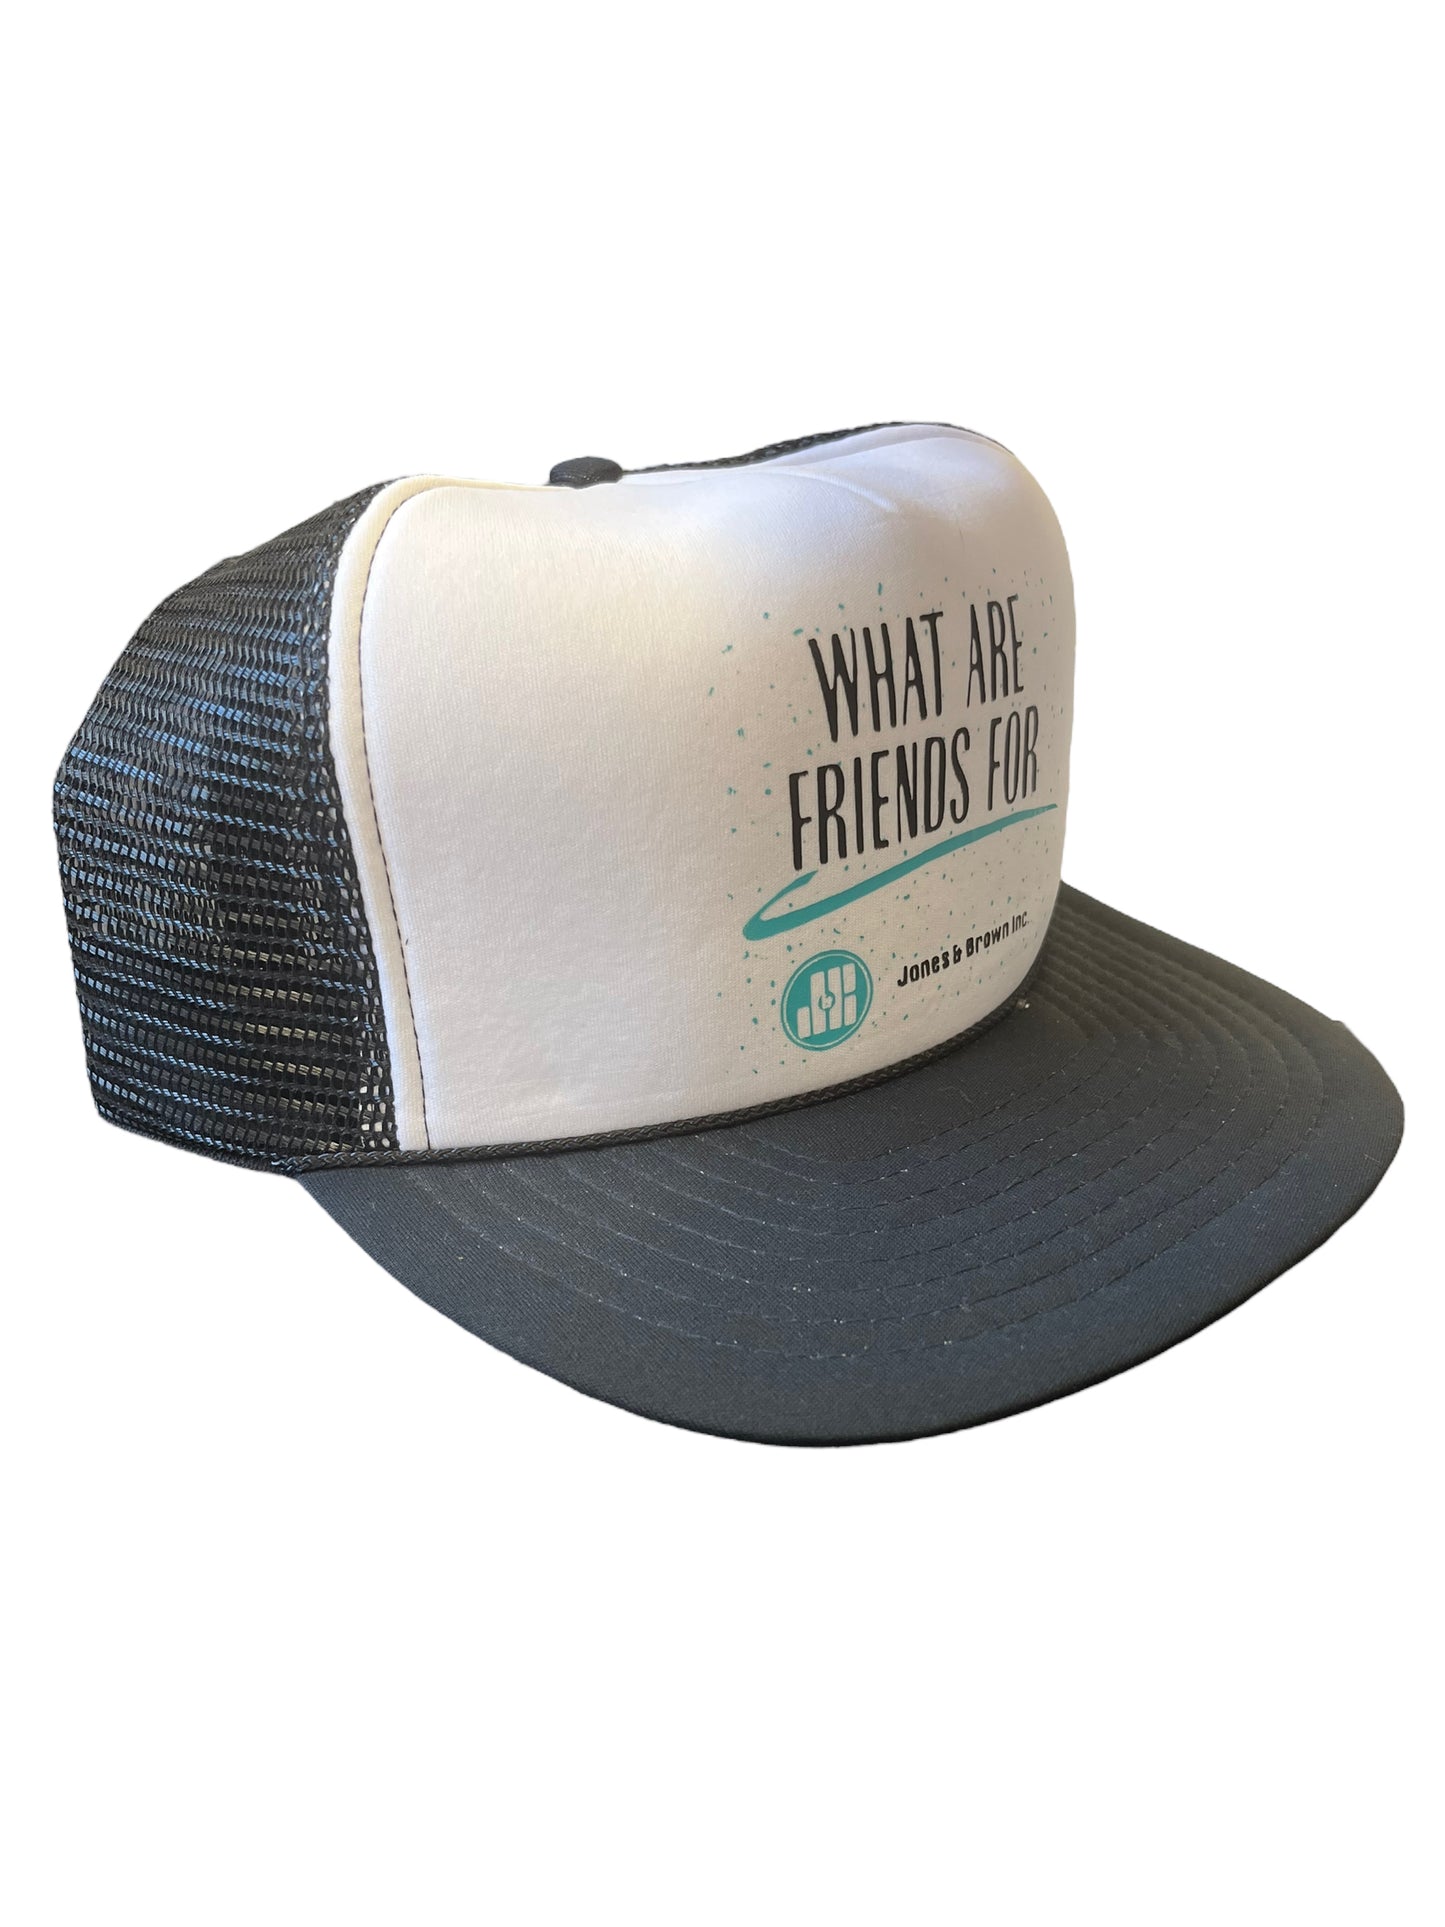 Vintage What Are Friends For Trucker Hat Brand New